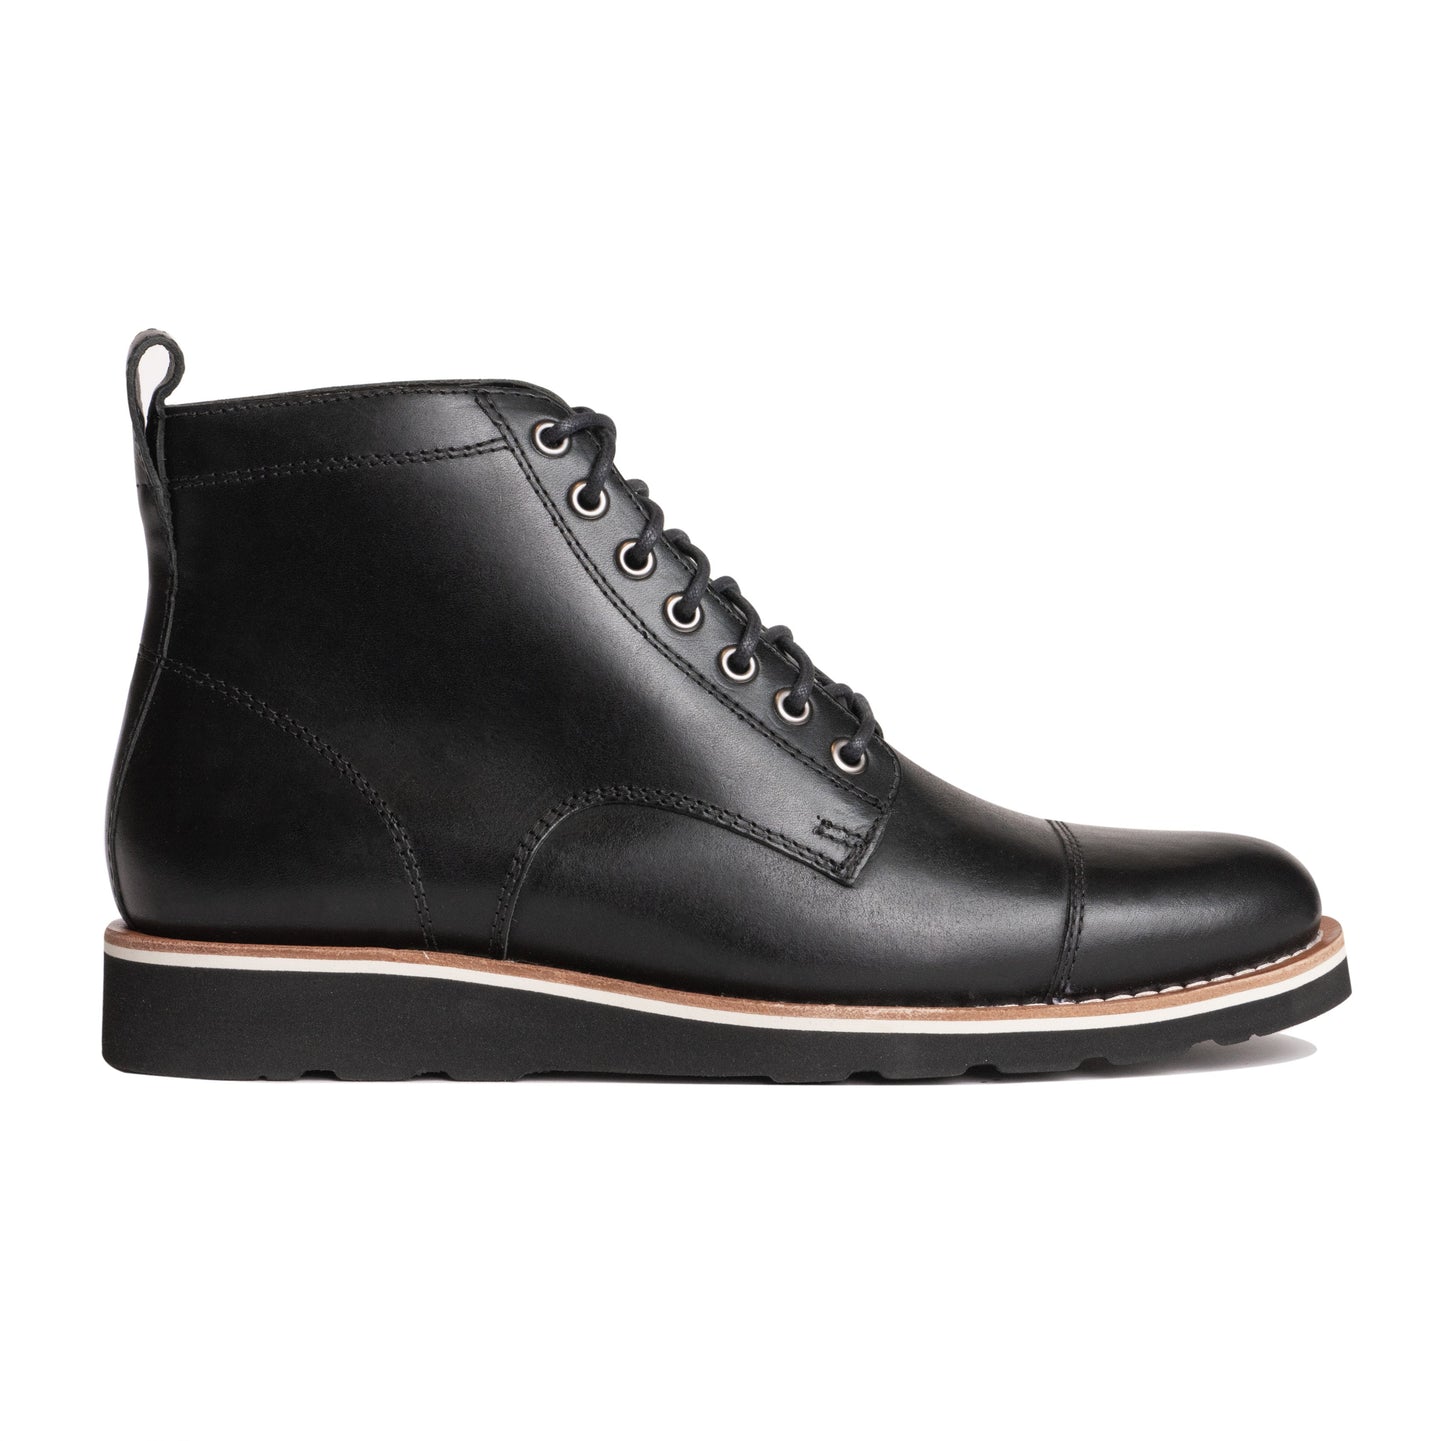 HELM Boots The Death & Co. The Lou Black